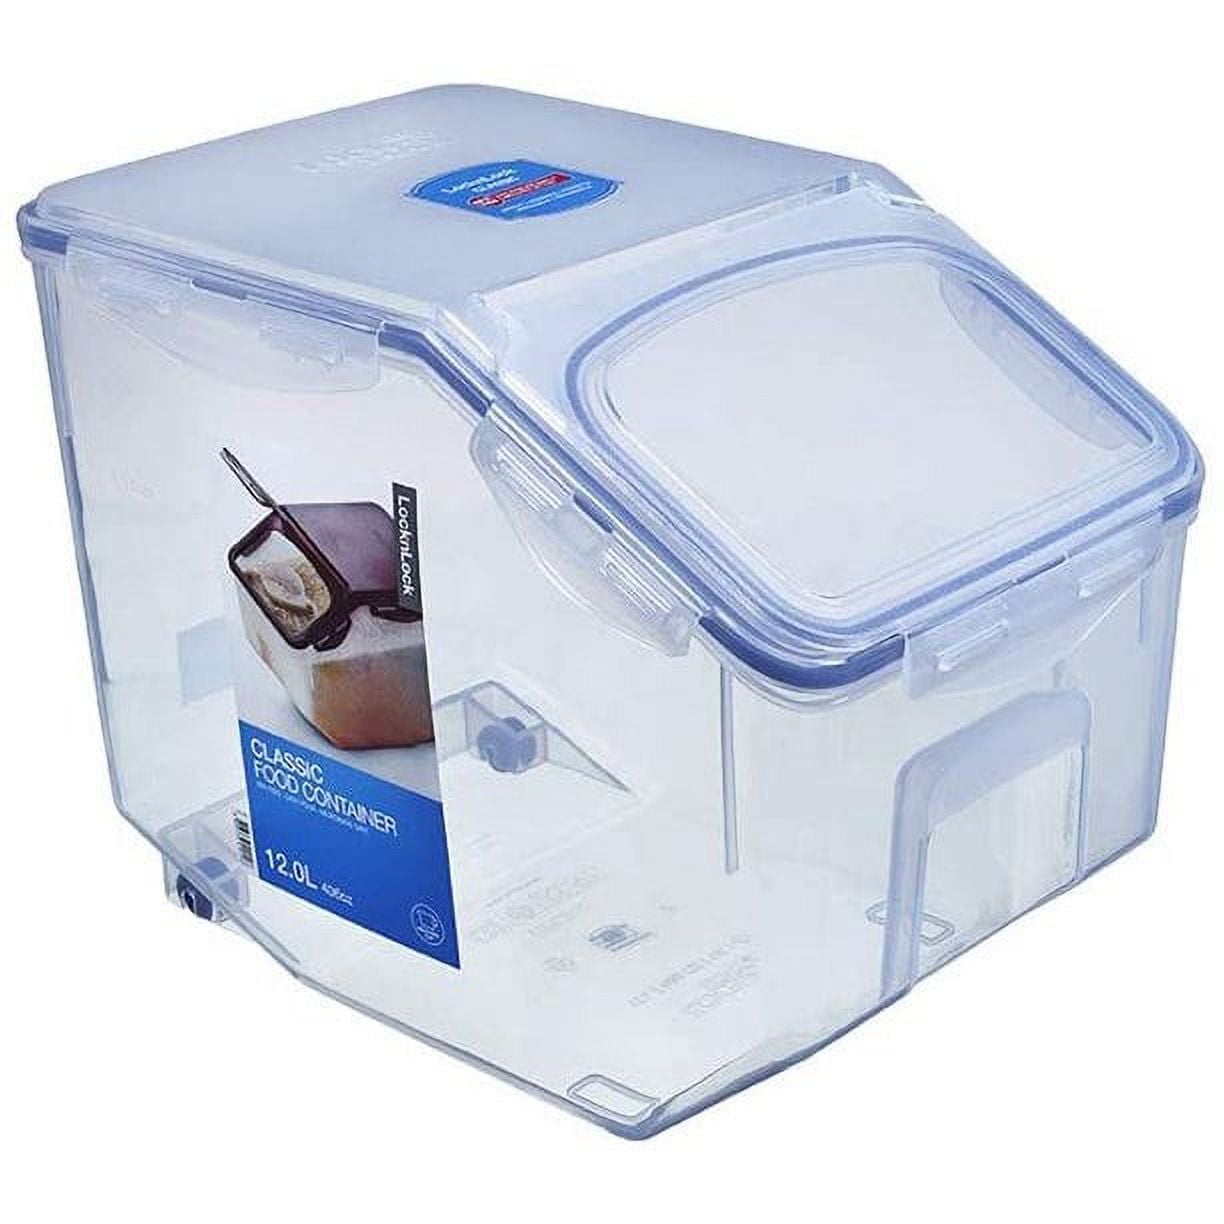 Topware TP062 Blue Check Steel Lock Containers Lunch, 50% OFF